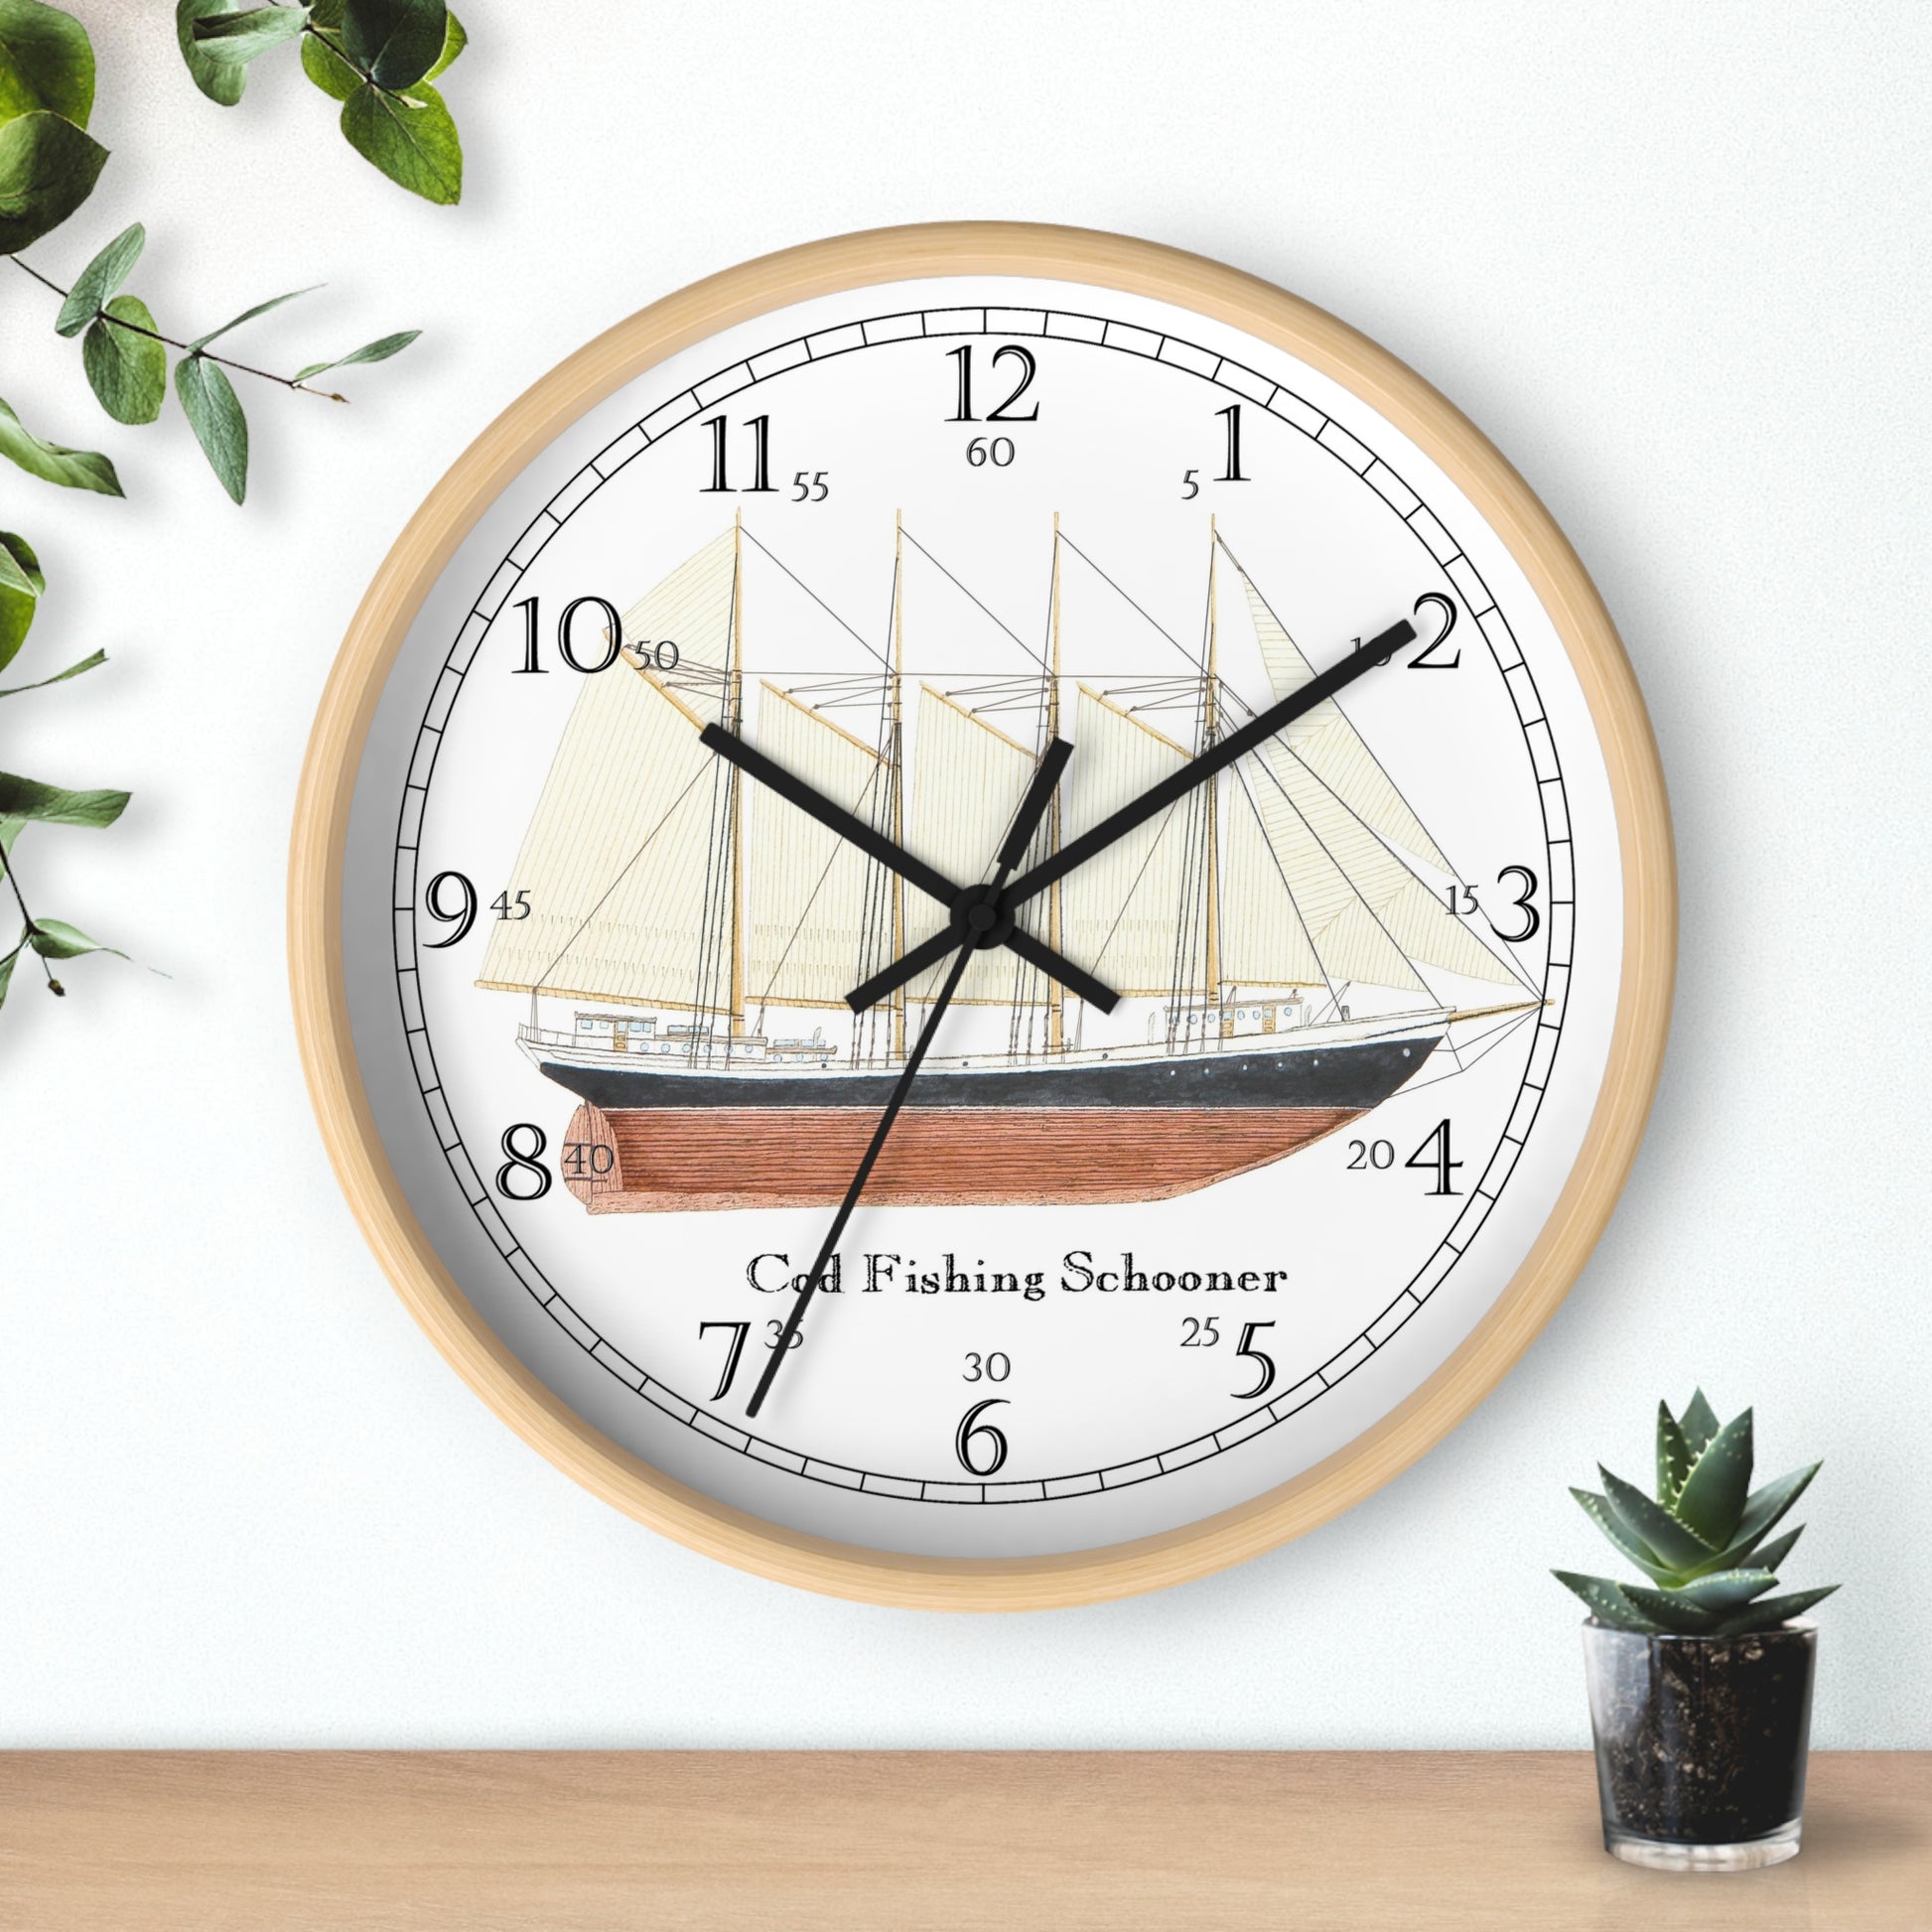 The Atlantic Pearl Cod Fishing Schooner English Numeral Clock will add a special touch to any room.